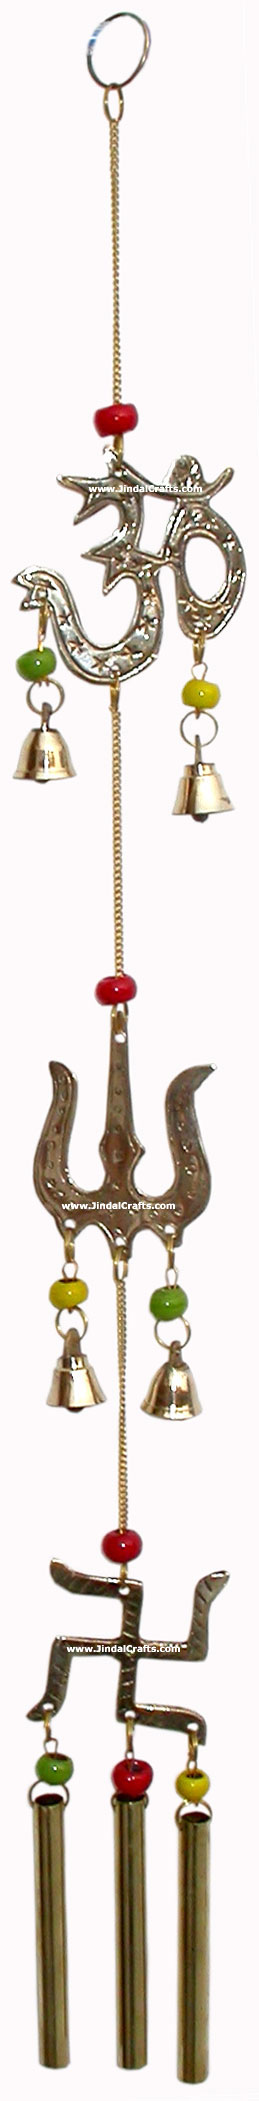 Brass made Wind Chime Home Decoration Feng Shui Artifact from India Metal Crafts